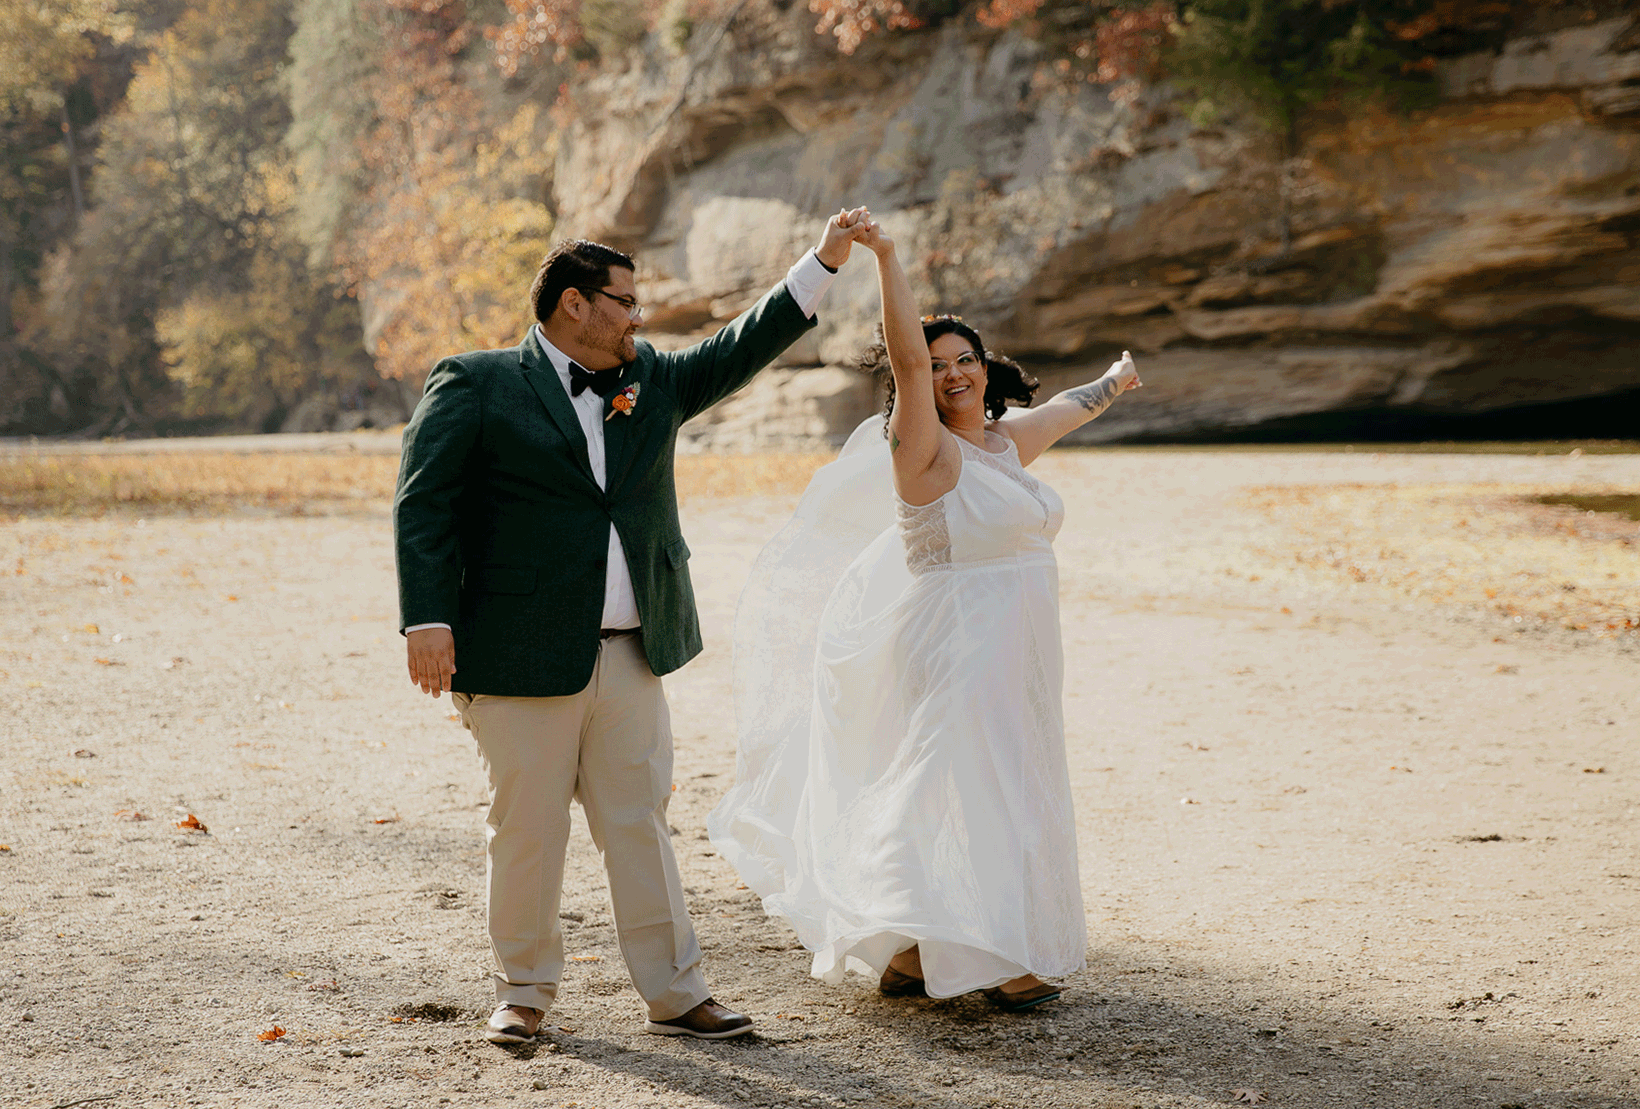 Ope! The 7 Best Places to Elope in the Midwest - Turkey Run, Indiana Elopement